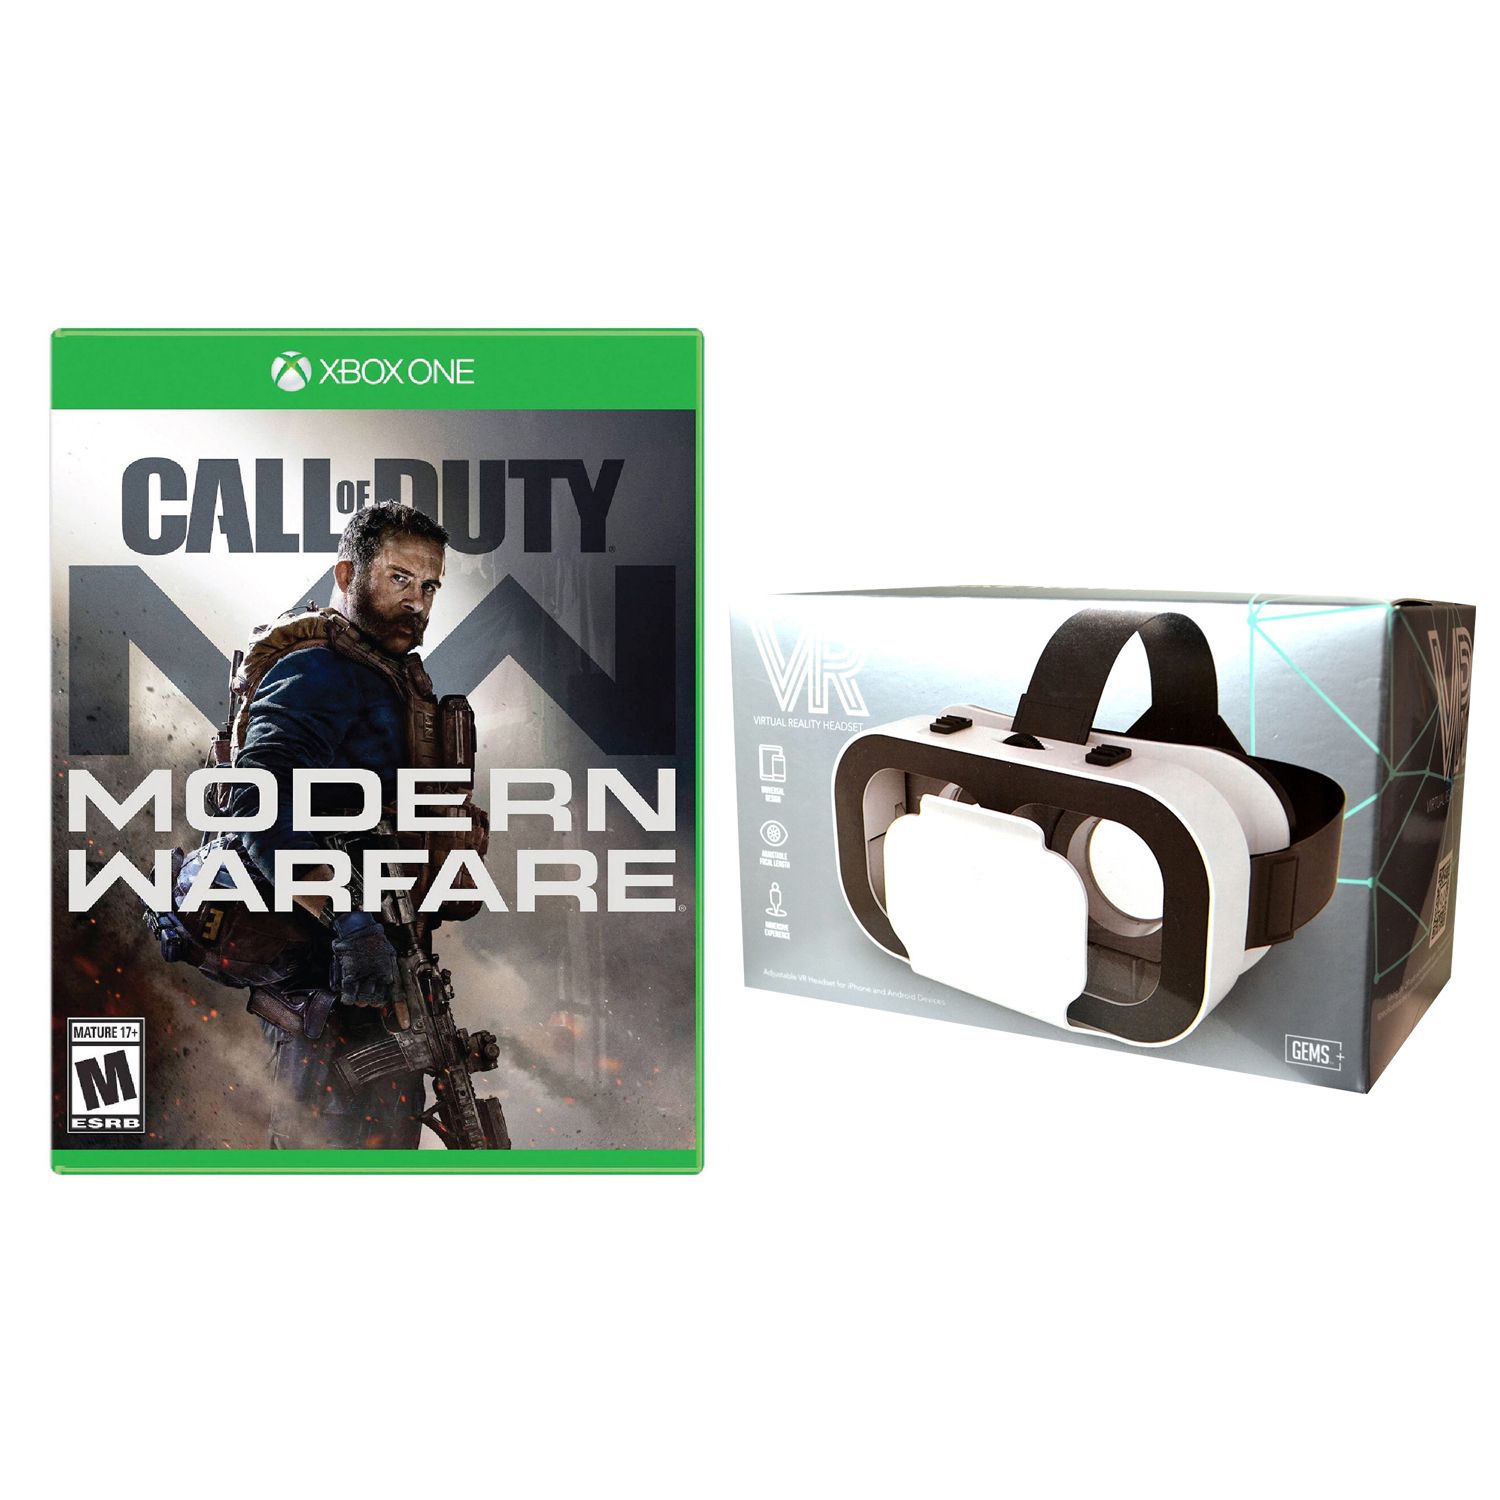 vr headset for xbox one games